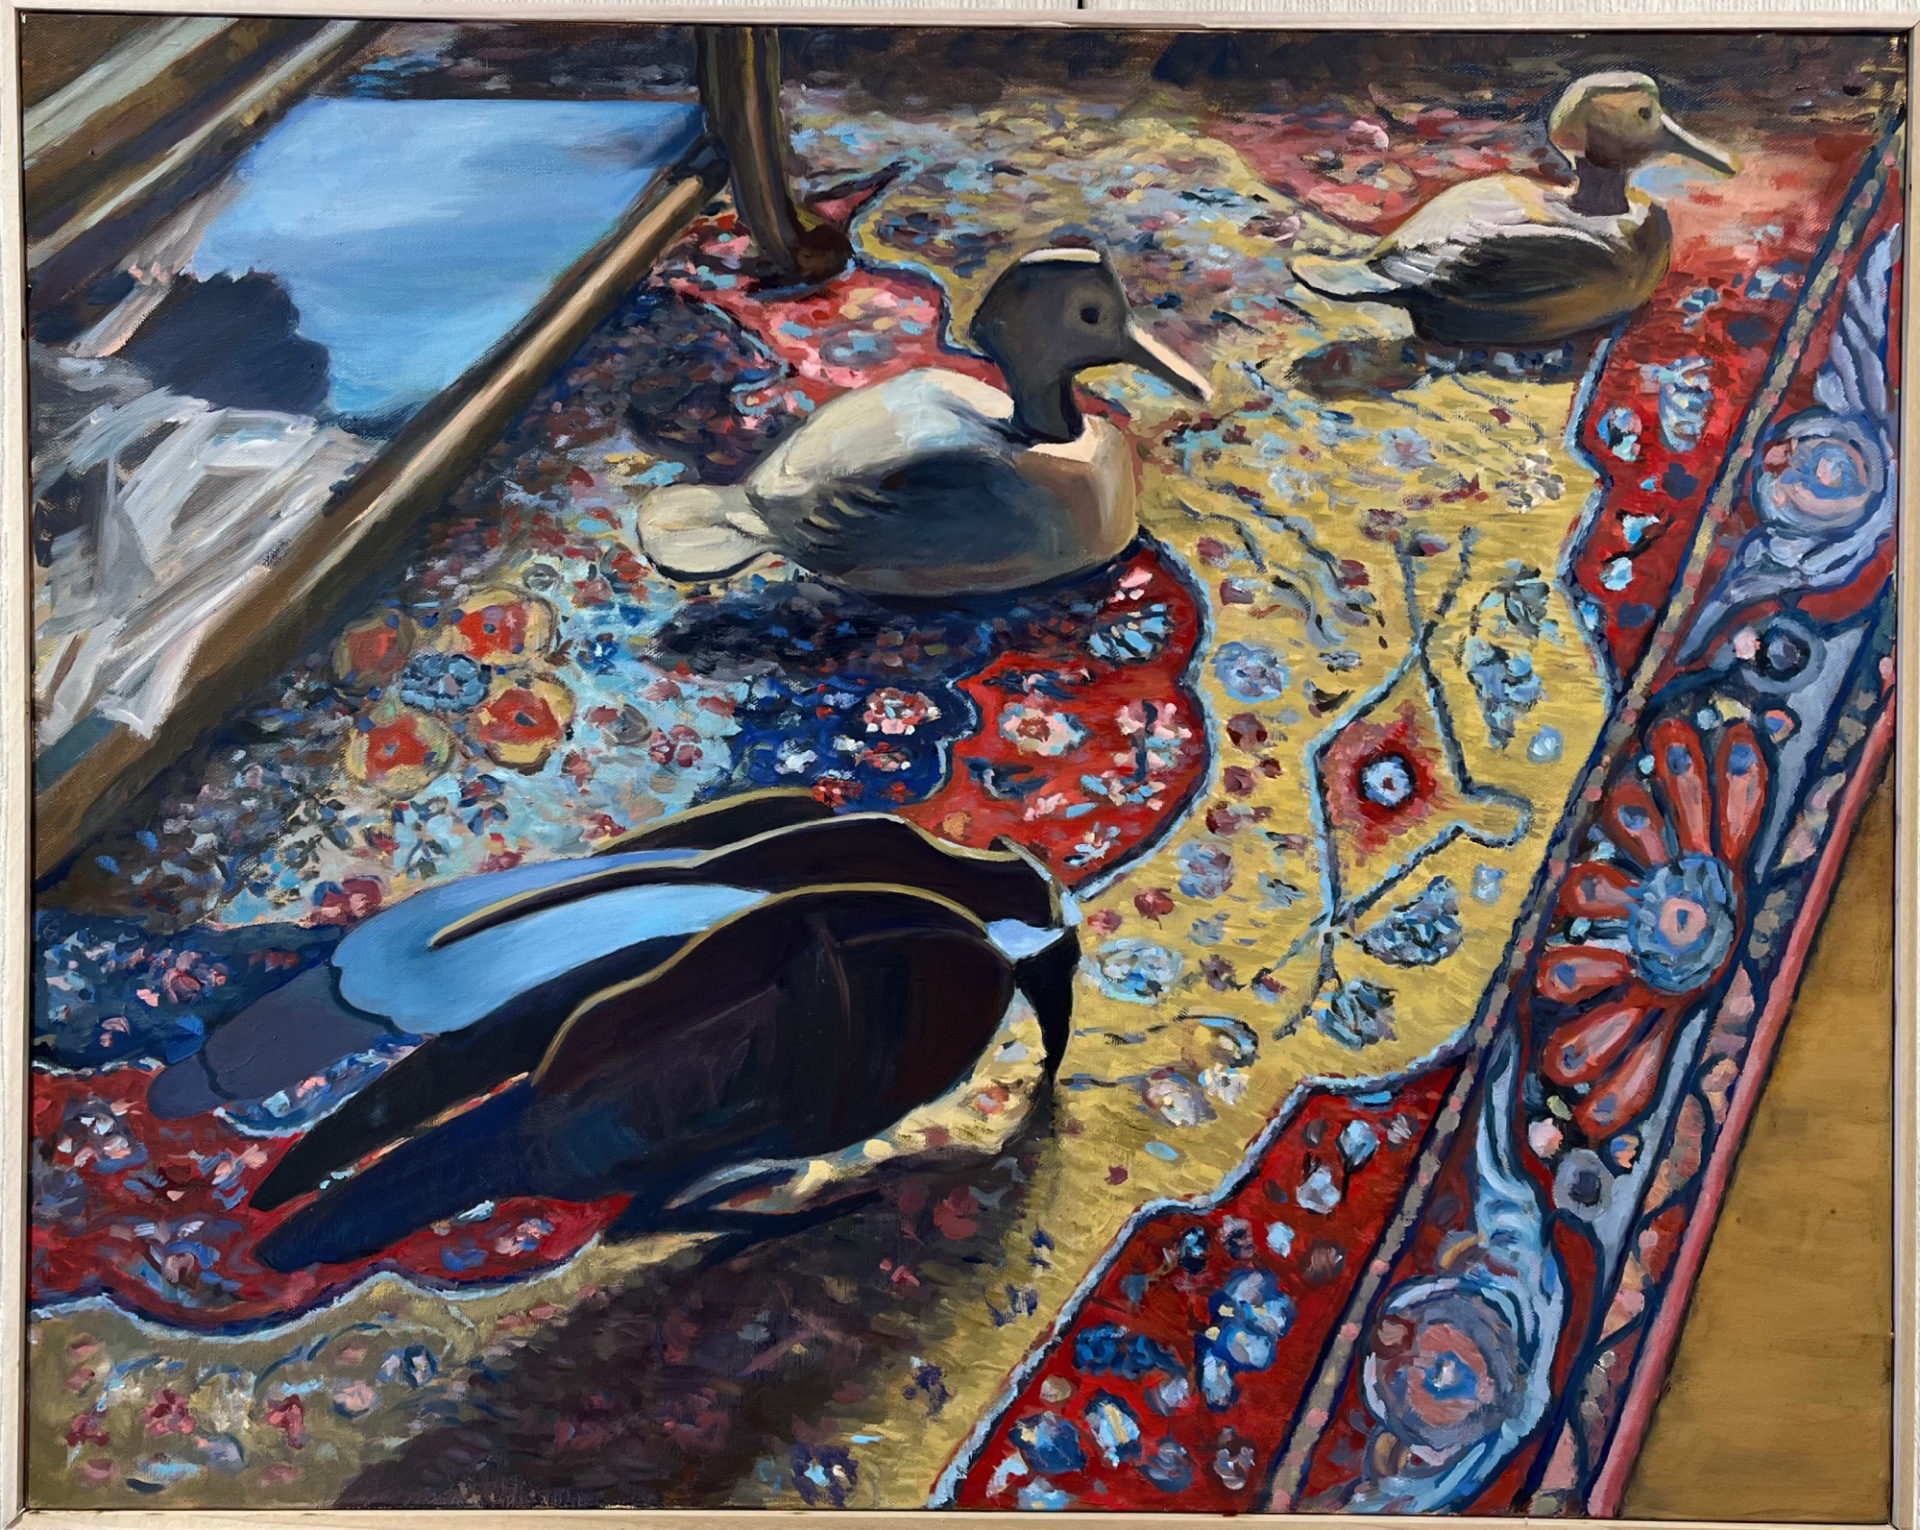 Painting of a Persian rug with red and yellow background and flower shapes; a painting of brown wooden ducks sit on top of the rug.